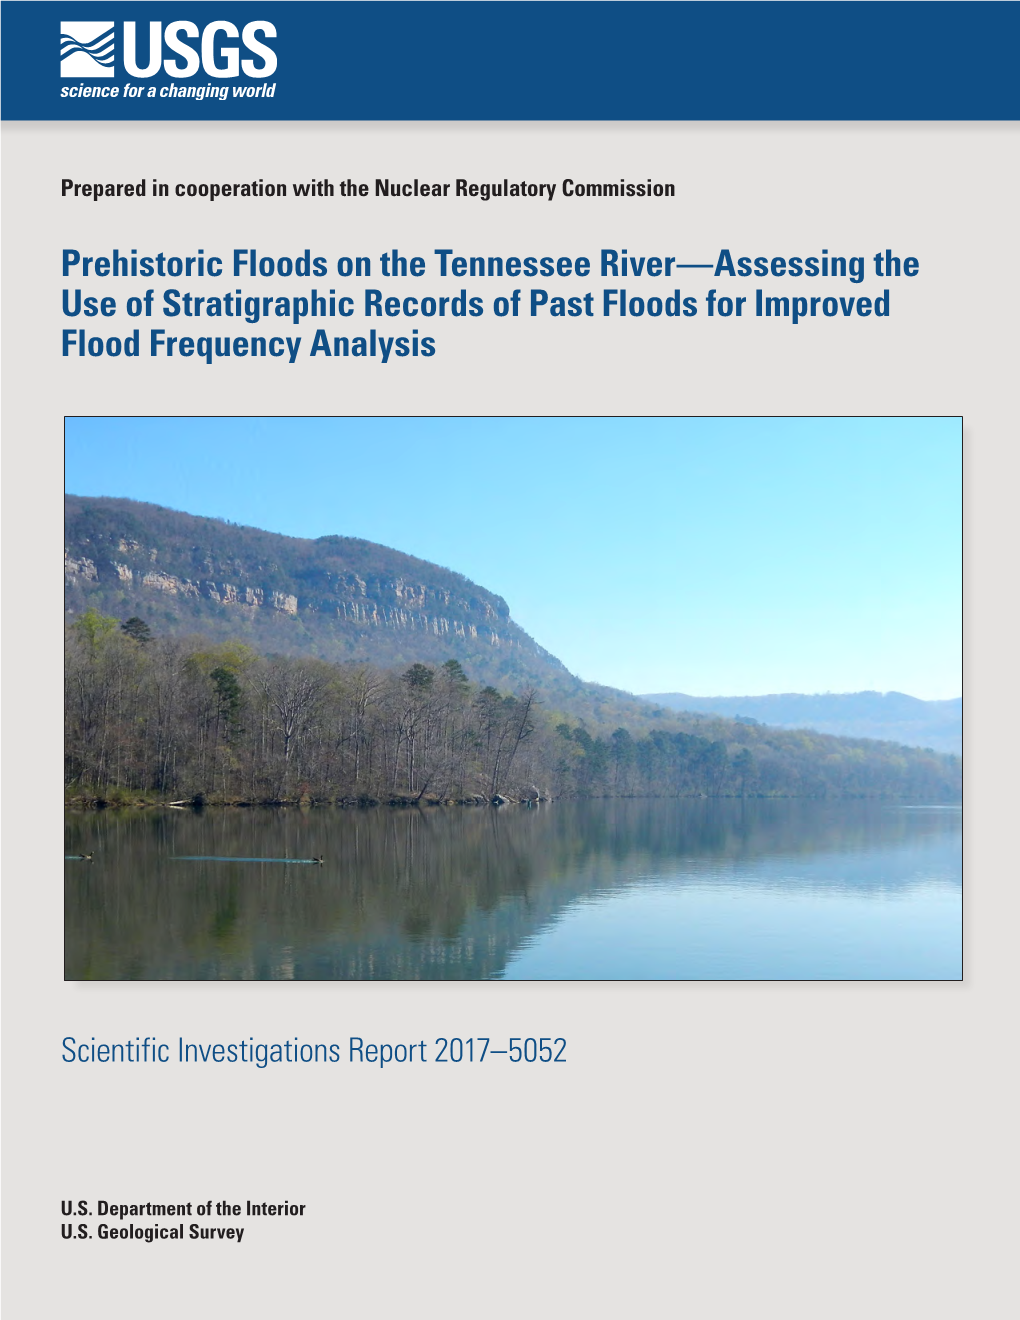 Prehistoric Floods on the Tennessee River—Assessing the Use of Stratigraphic Records of Past Floods for Improved Flood Frequency Analysis